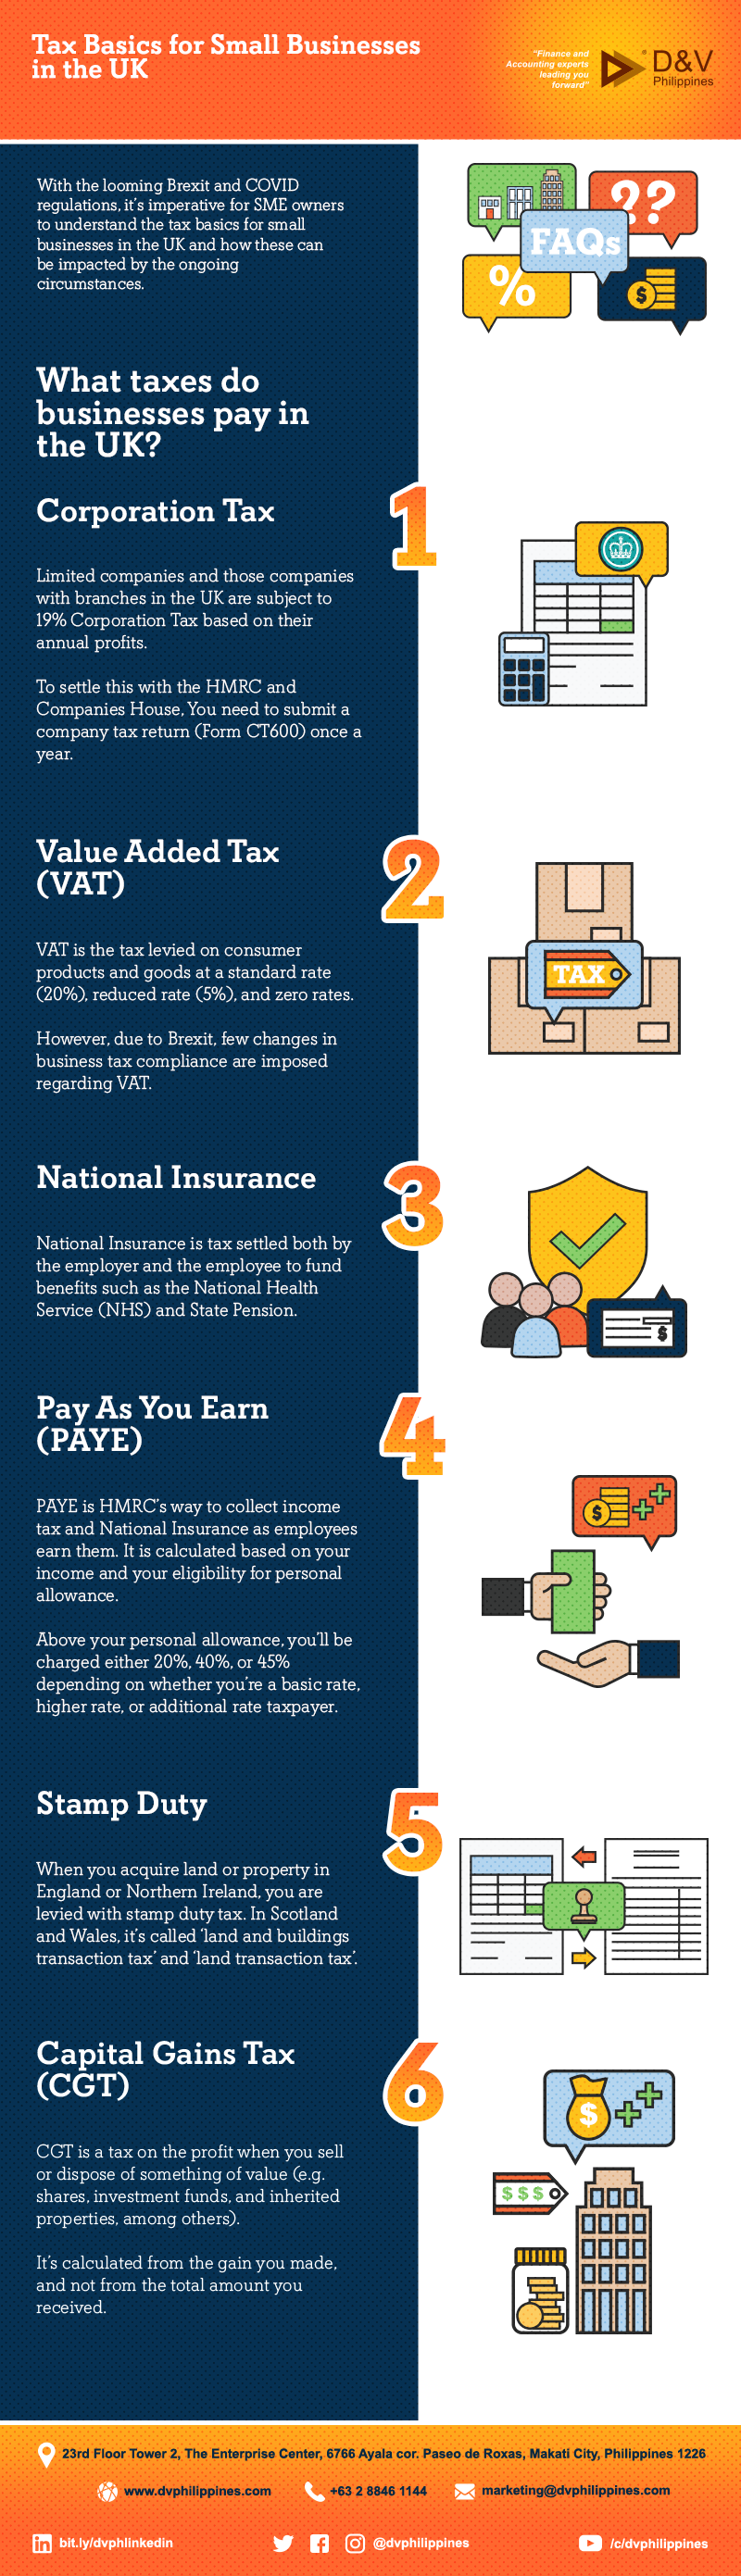 Infog_W_C_Tax-Basics-for-Small-Businesses-in-the-UKMain